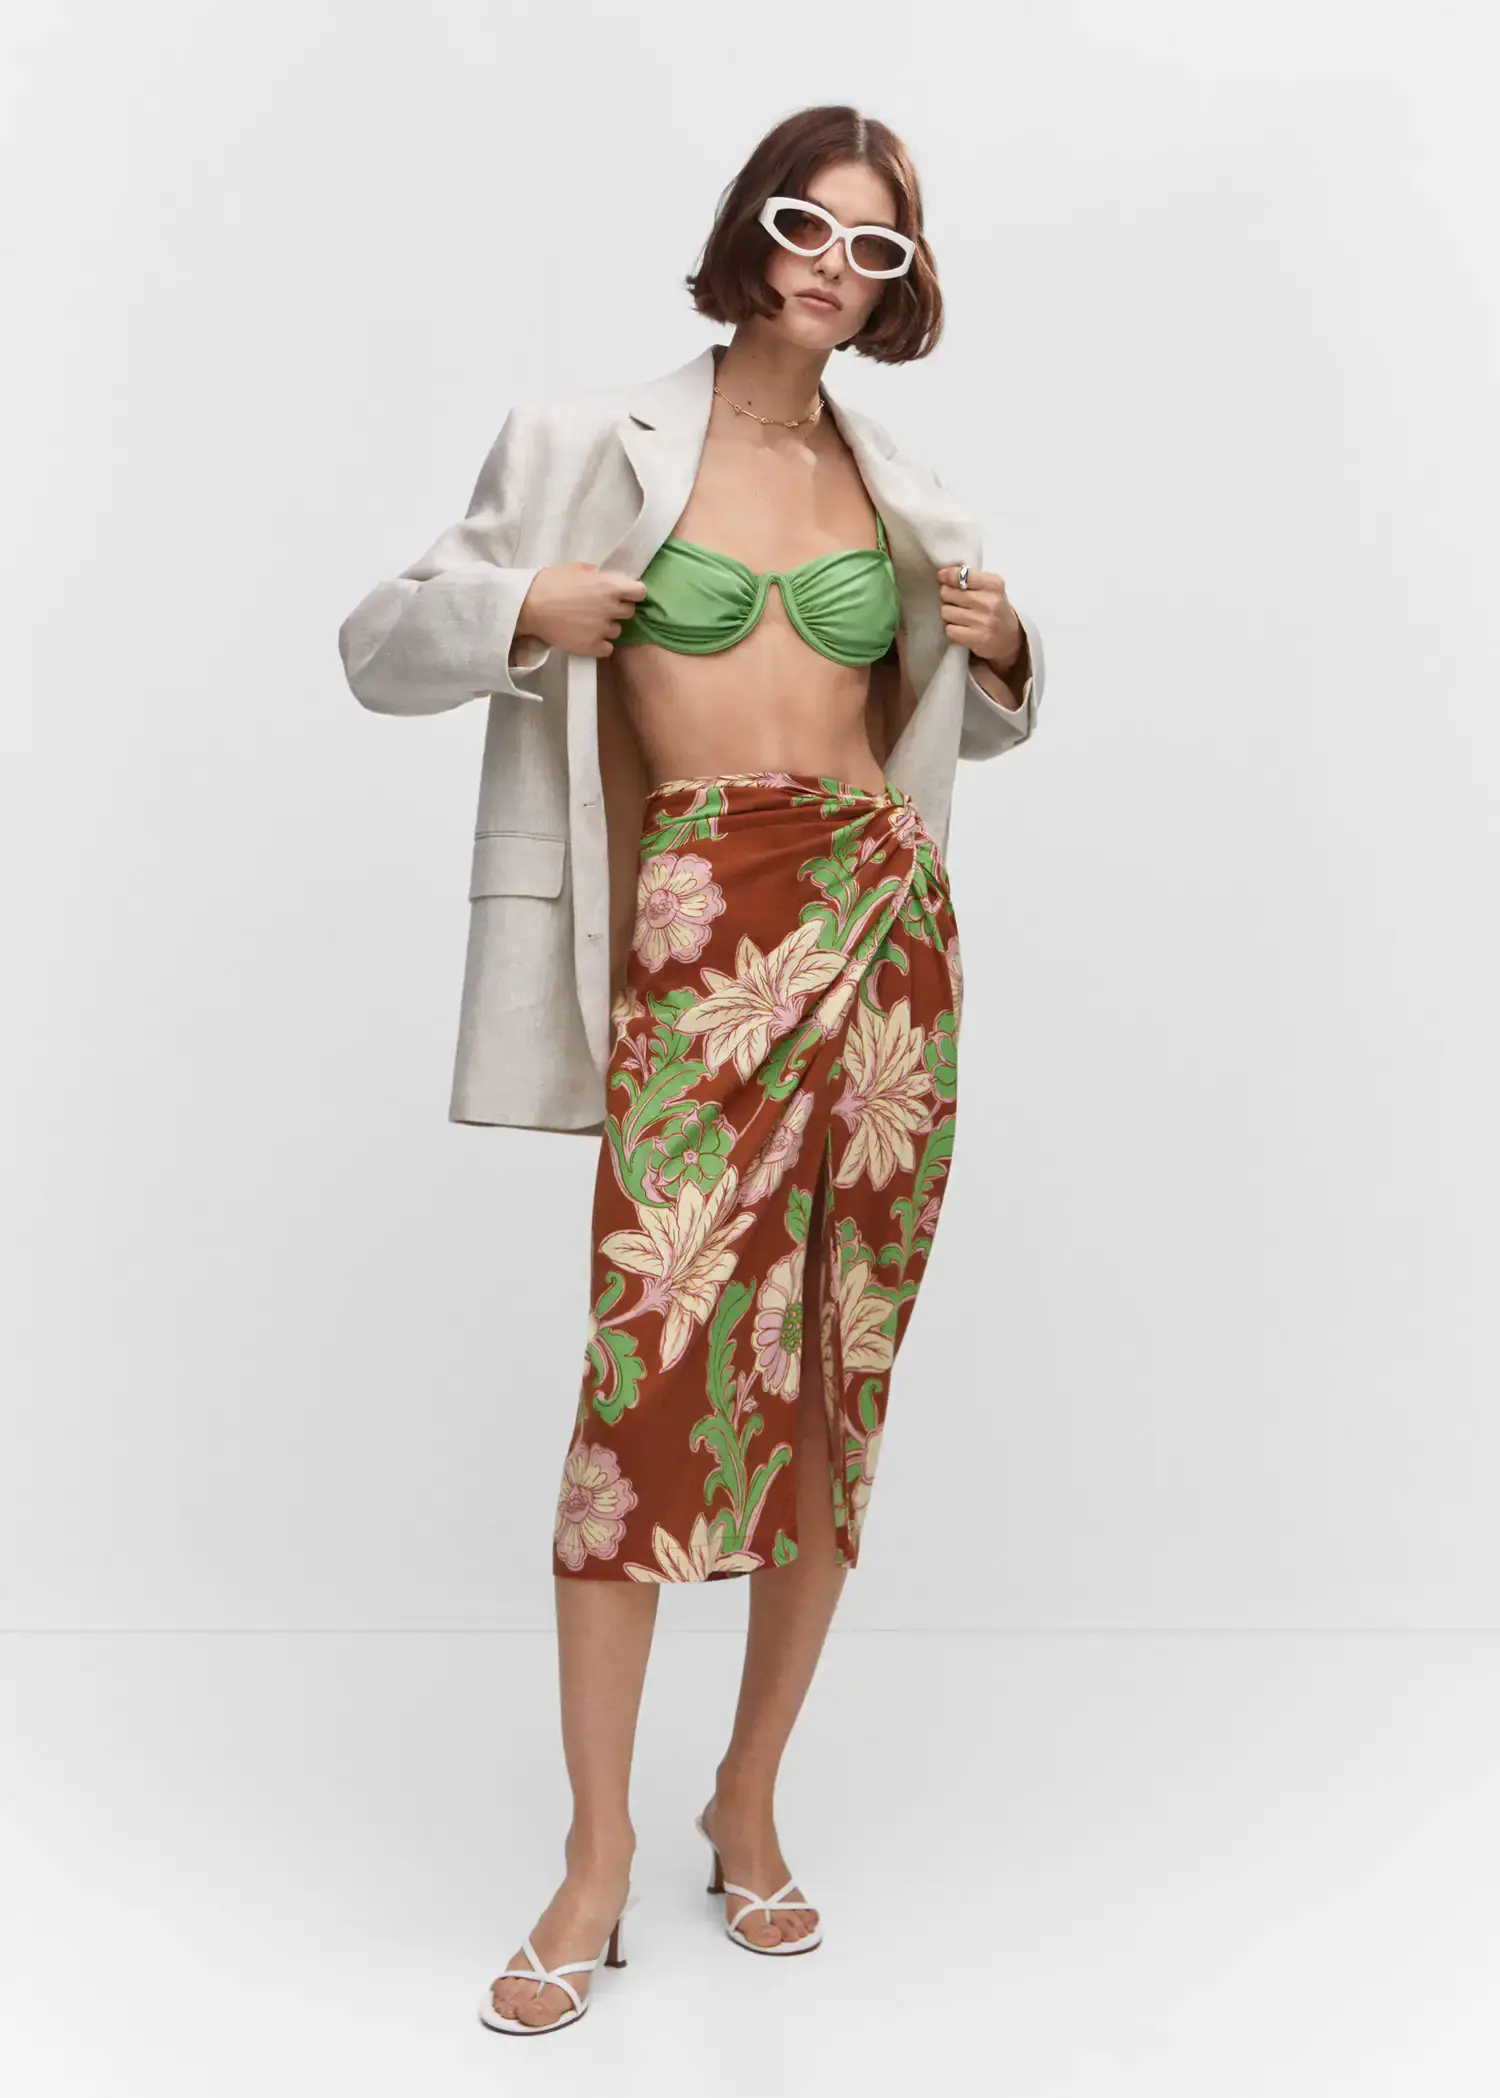 Mango Knot printed skirt. a woman wearing a green bra and a white jacket. 